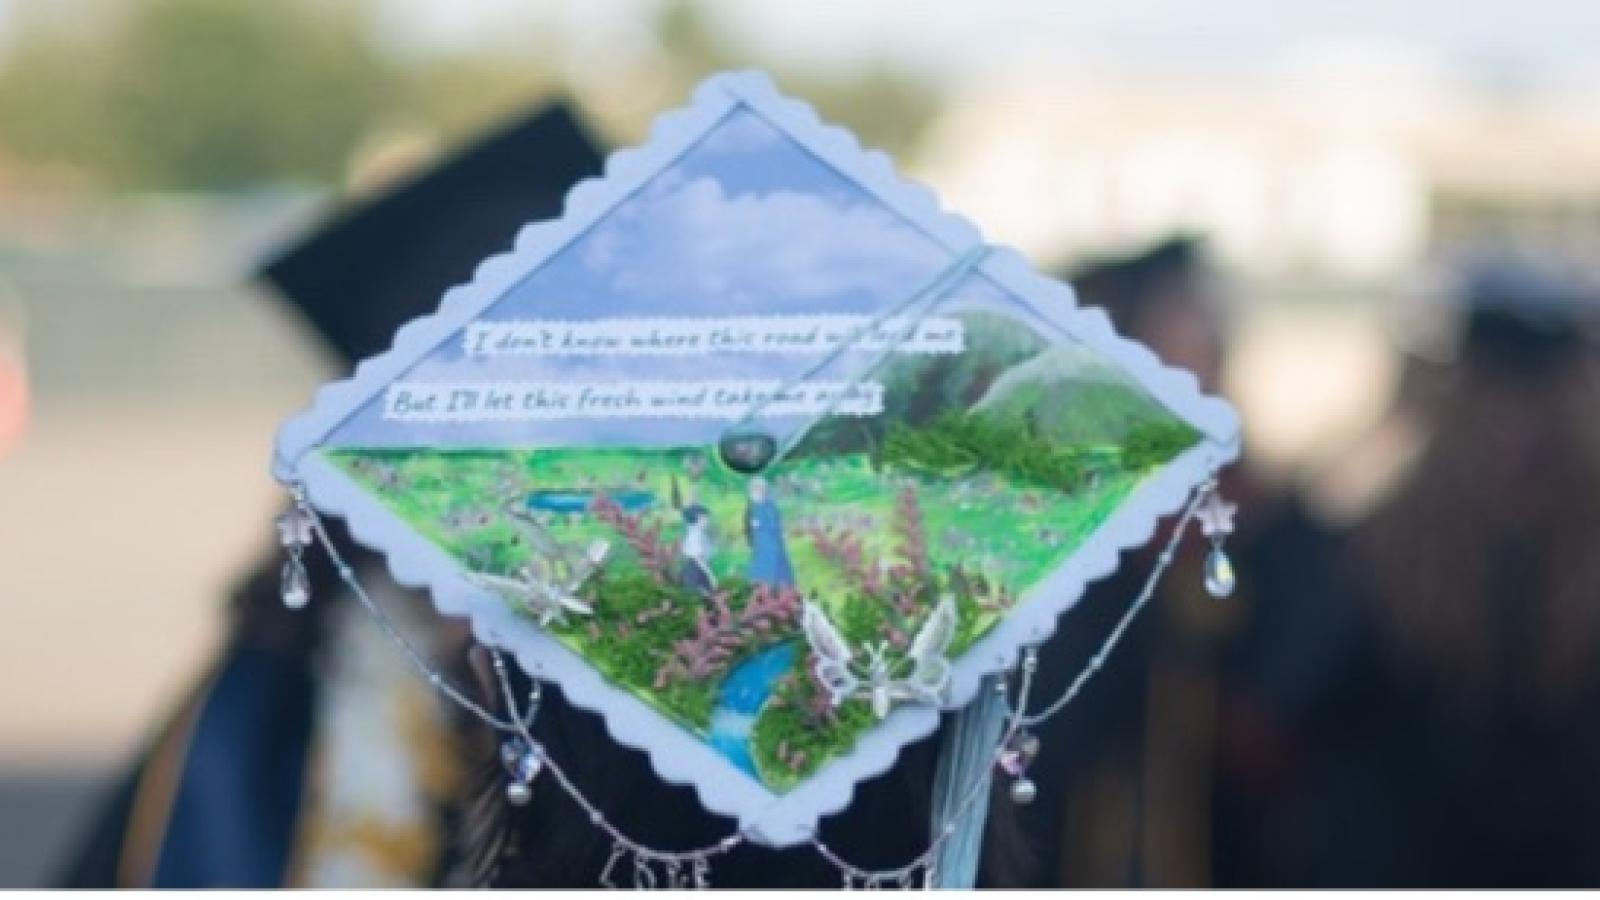 Close up of grad cap among group of college graduates at commencement